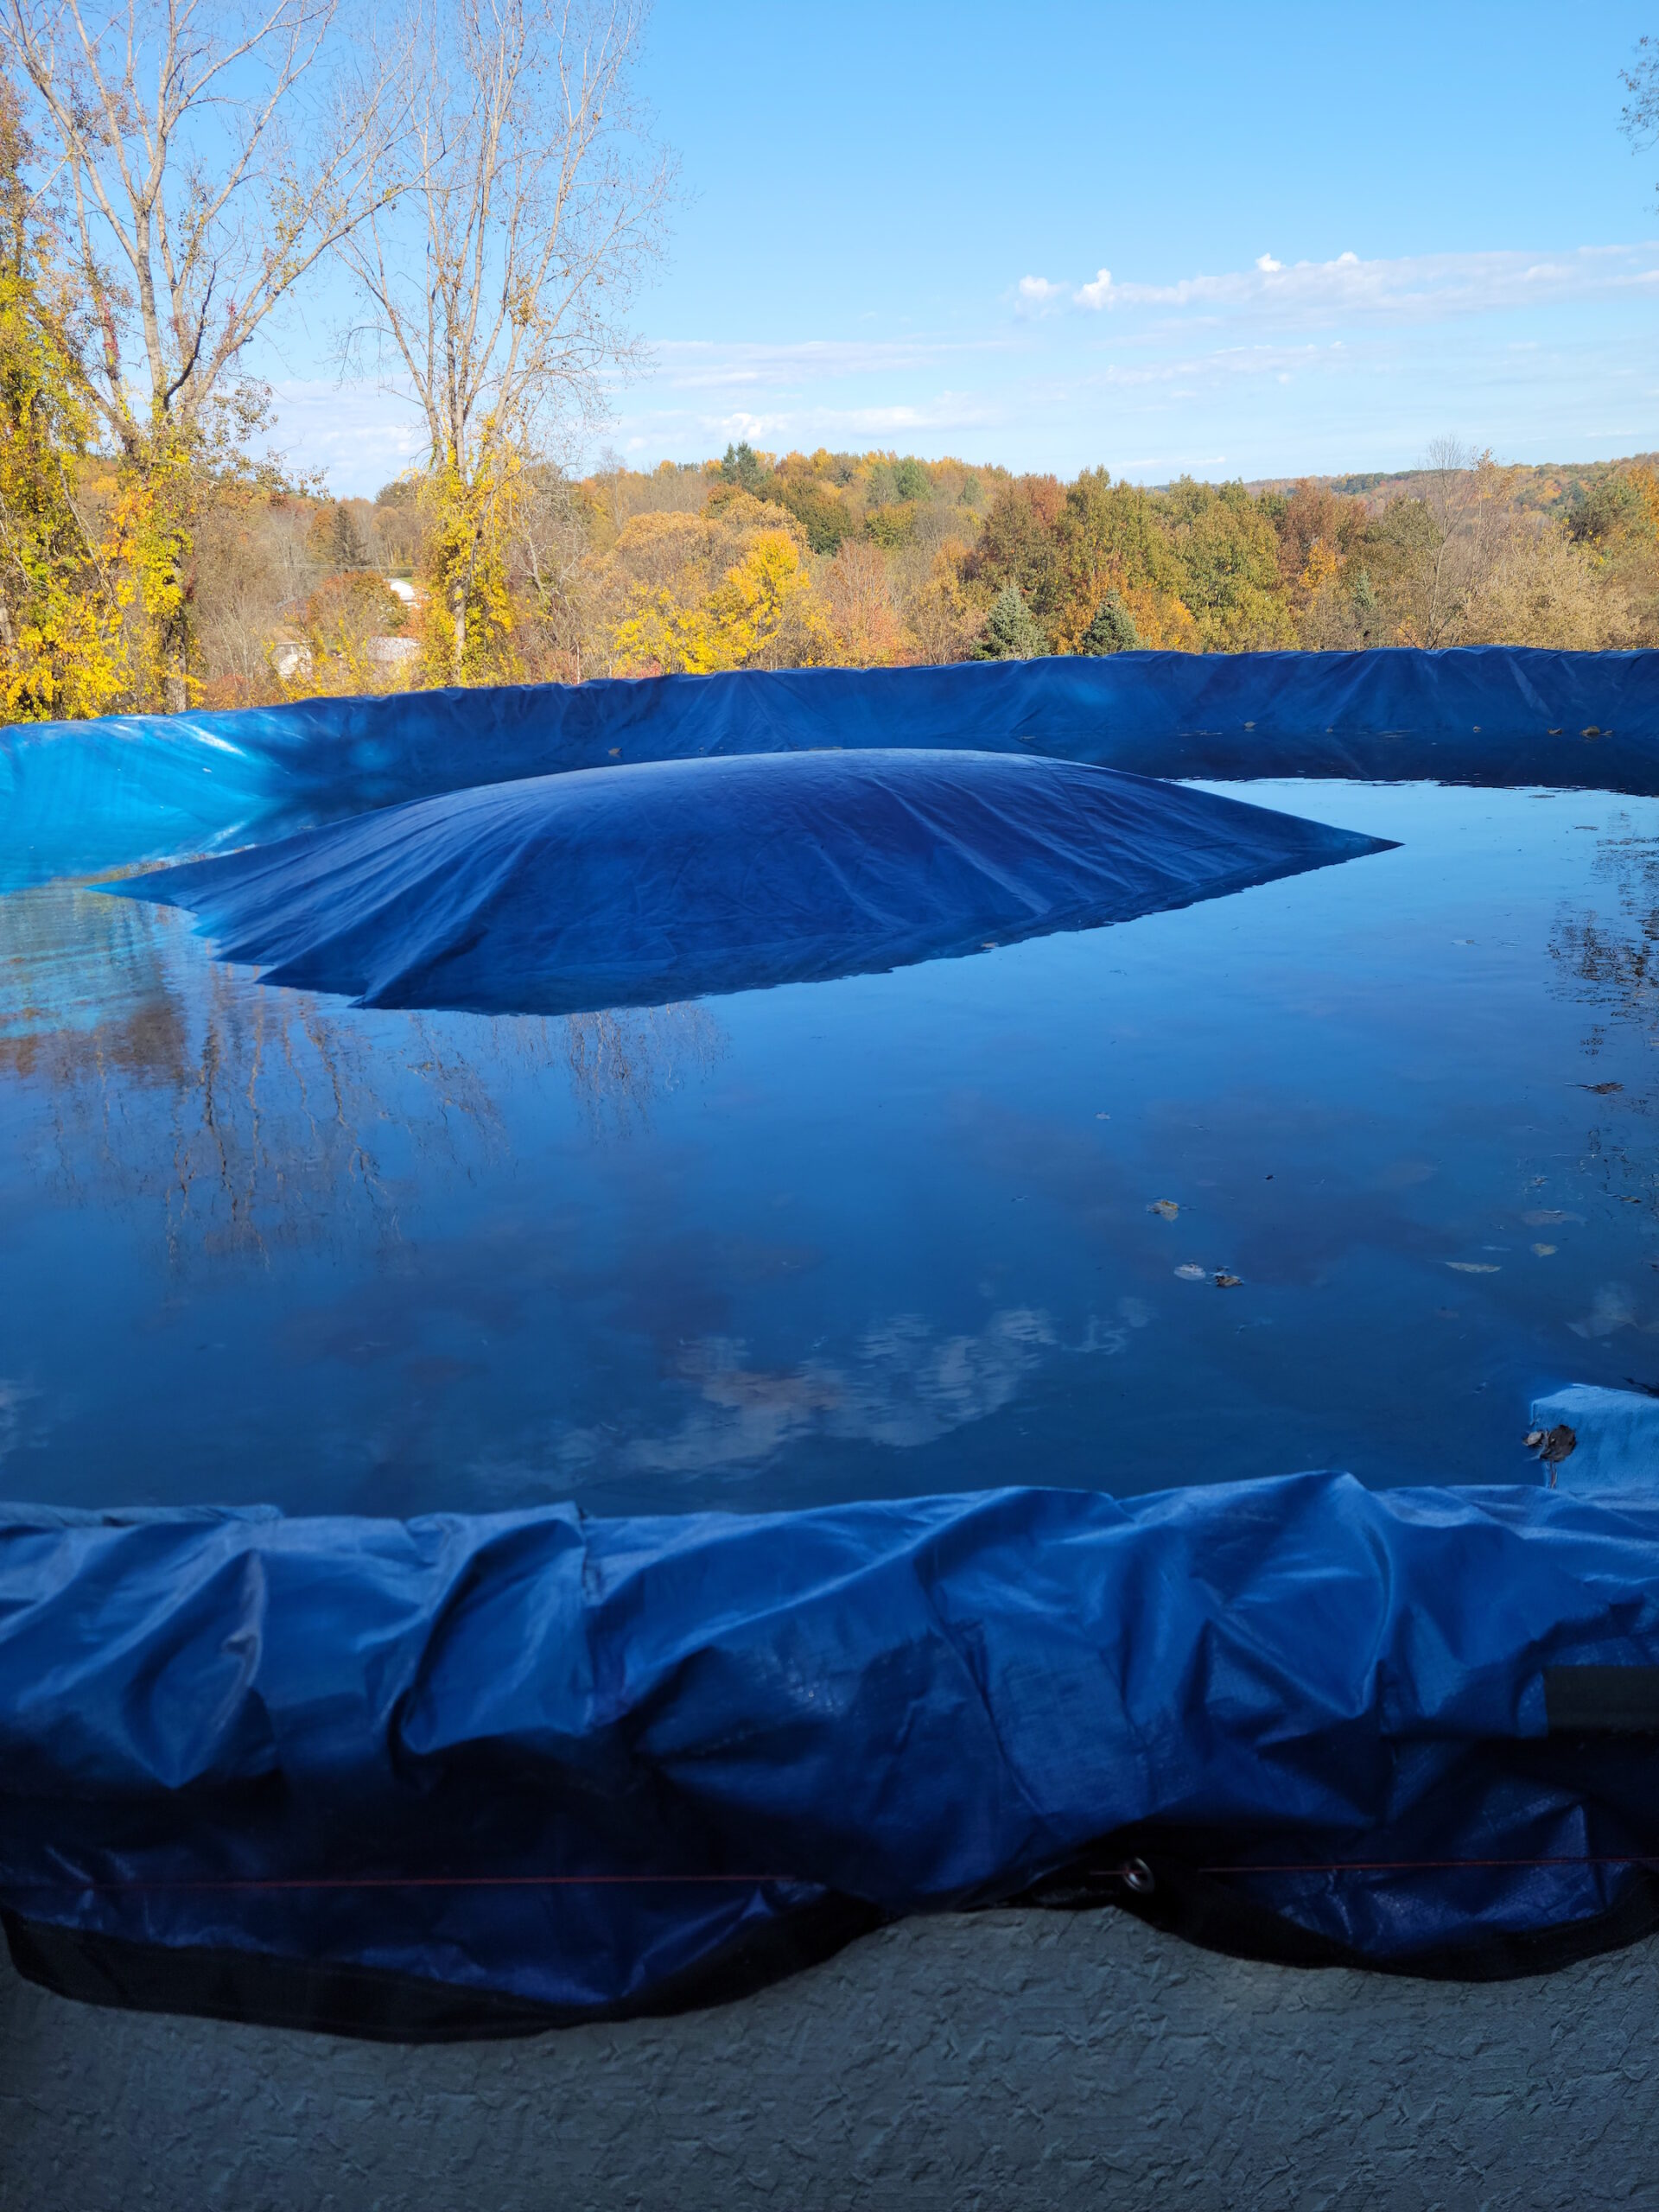 A round pool closed for the winter with pool pillow rising from beneath the cover.